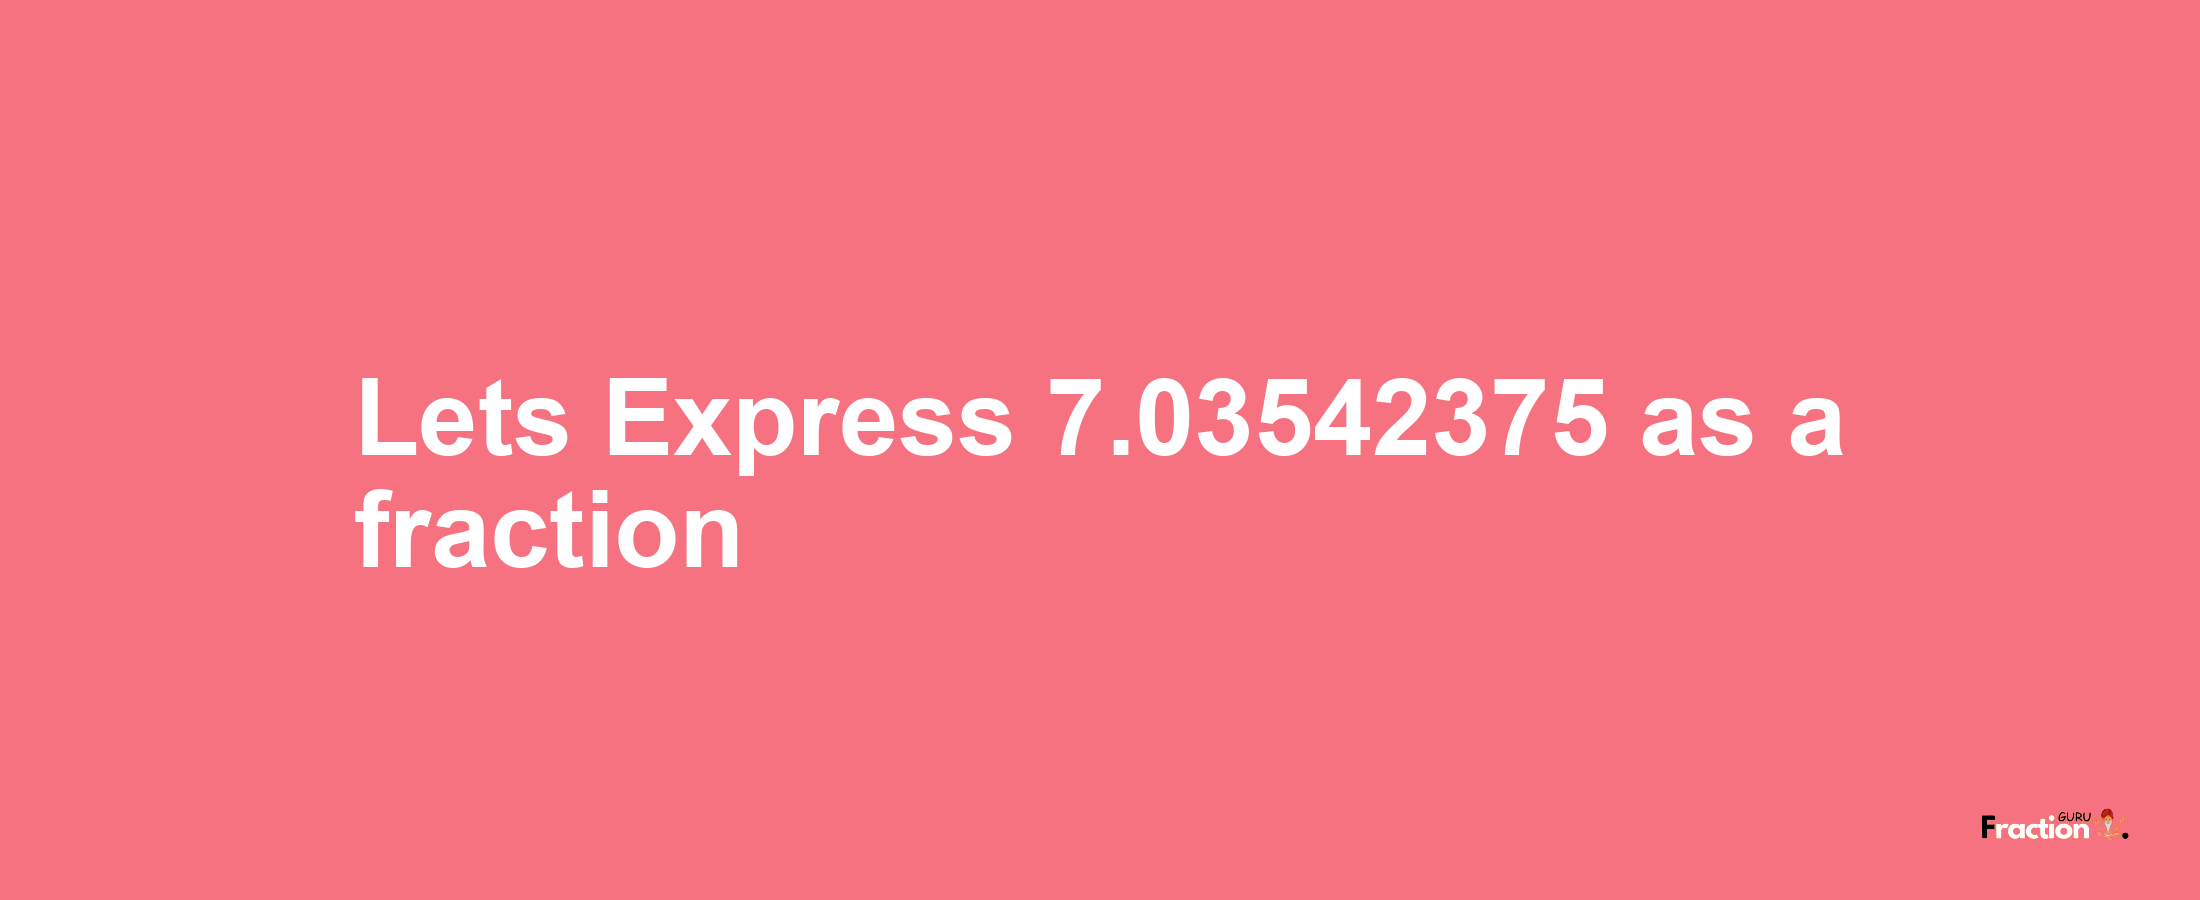 Lets Express 7.03542375 as afraction